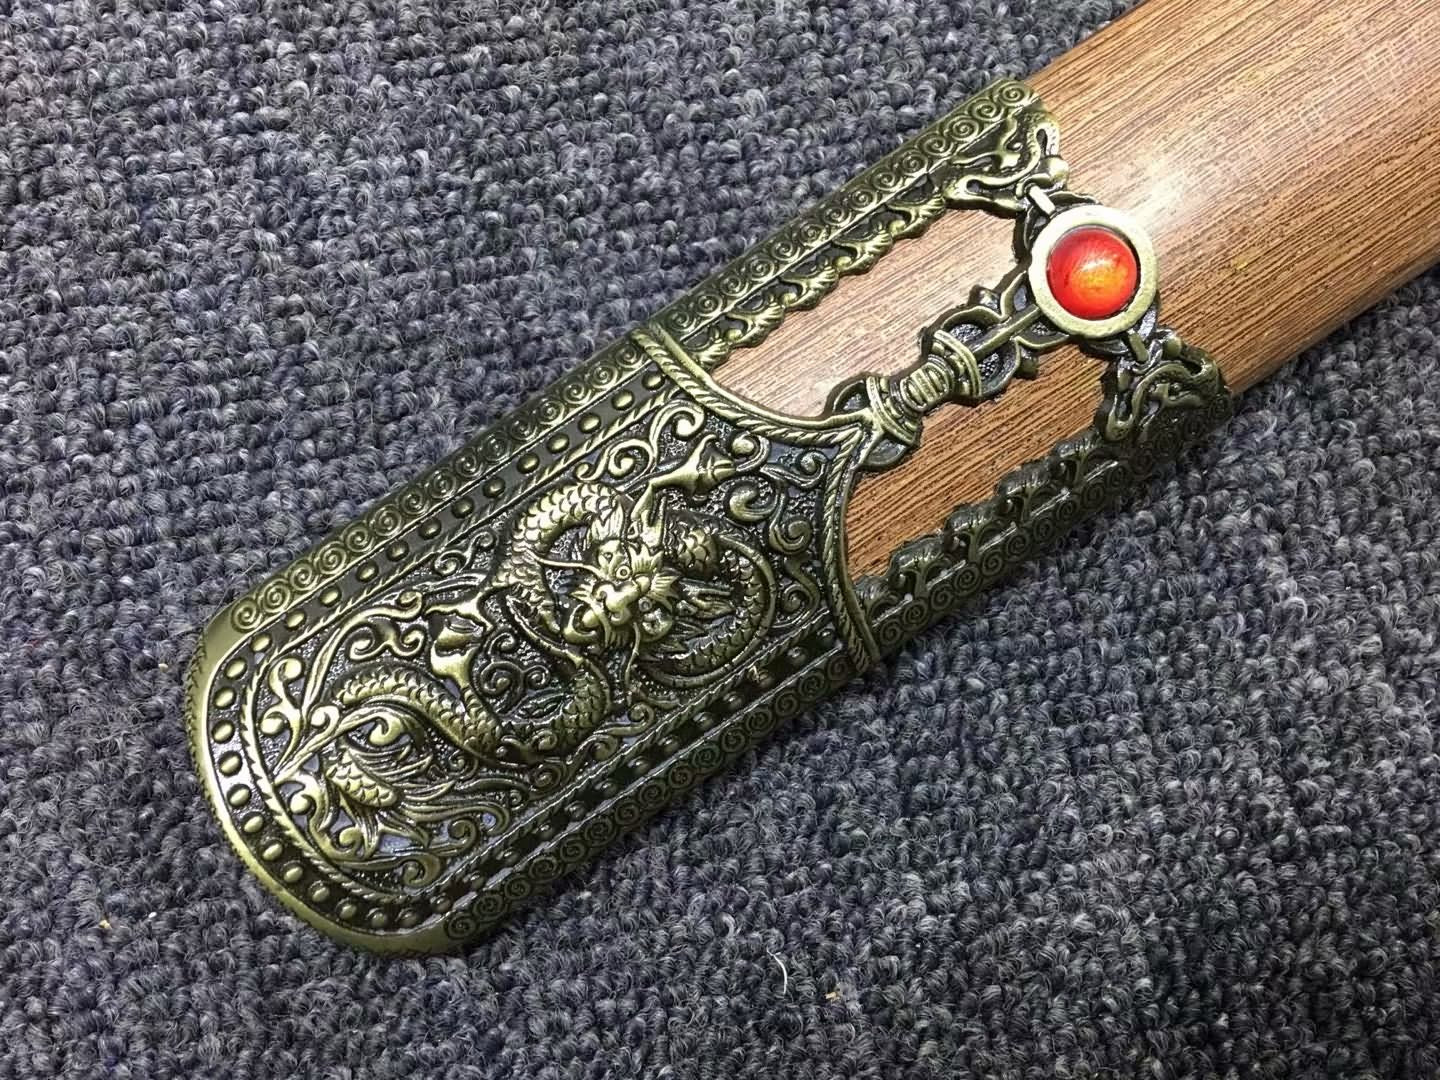 Yongle jian,High carbon steel blade,Rosewood,Alloy,Chinese sword - Chinese sword shop